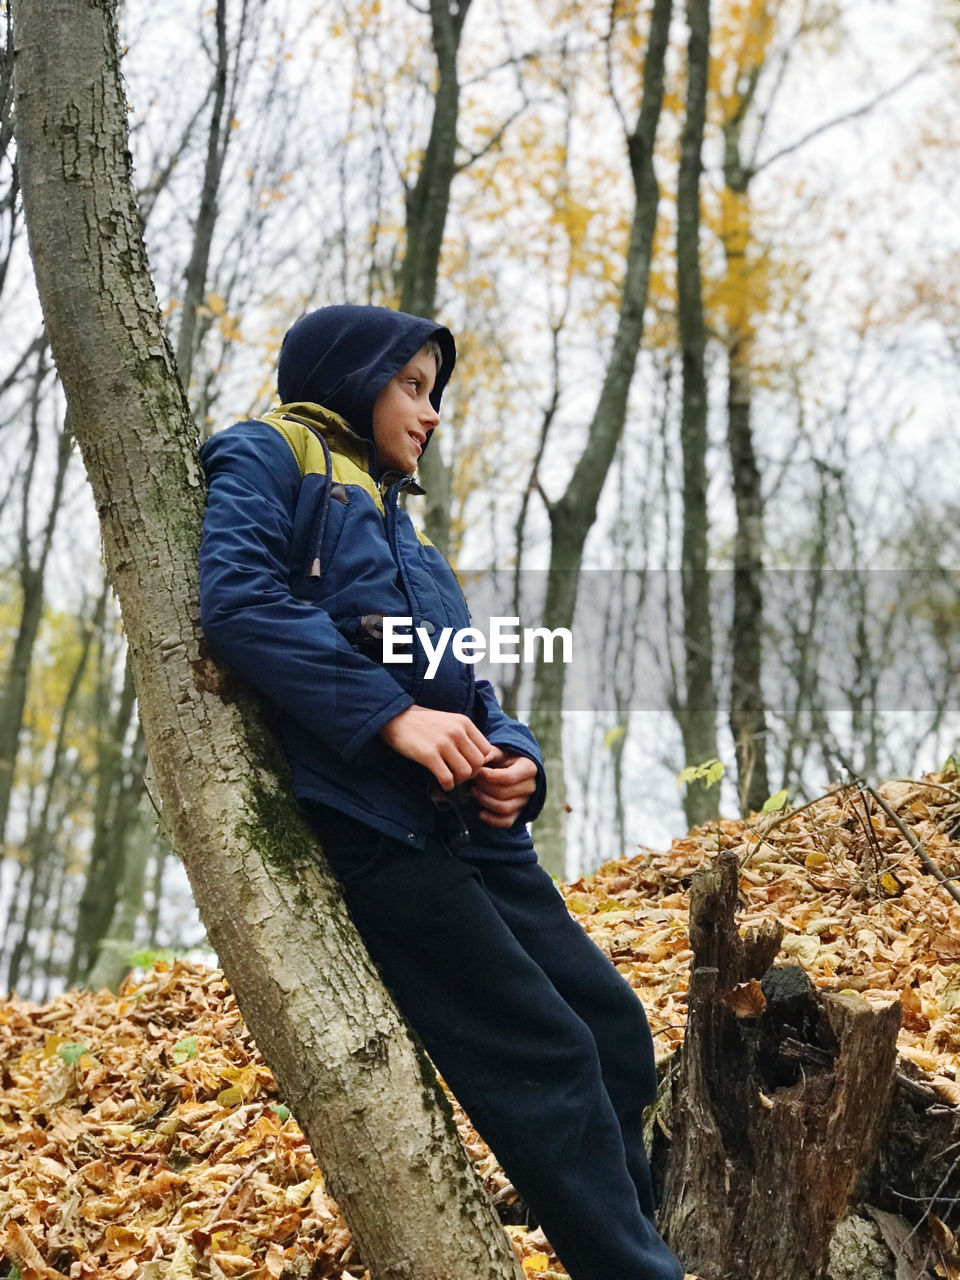 Boy stands leaning under a tree in the autumn forest and looks away